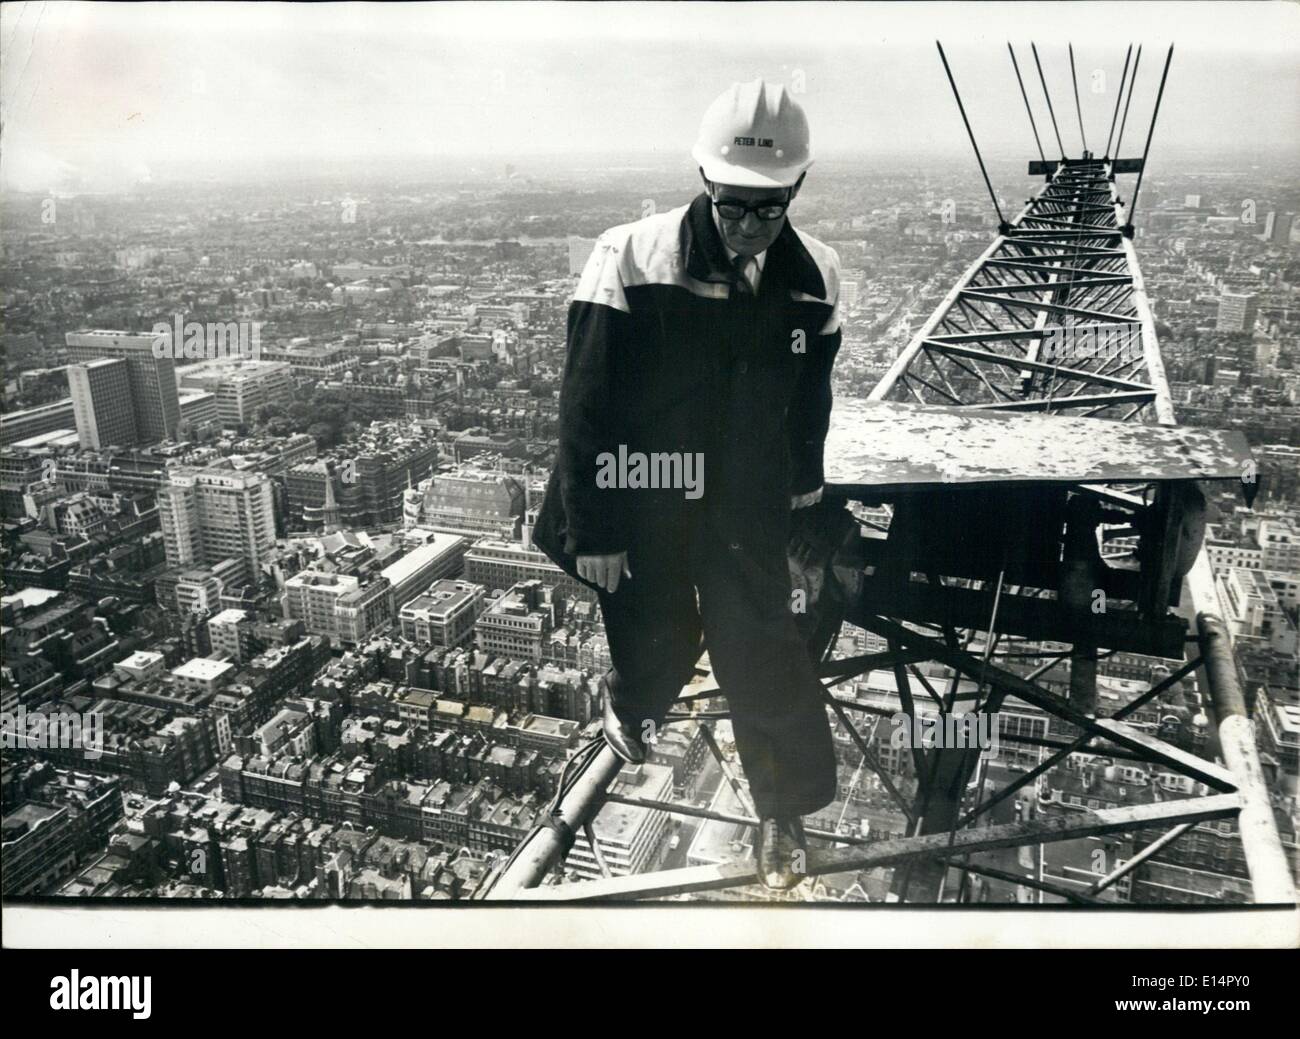 Apr. 18, 2012 - Ski-High Jim - The Man At The Top: With sure feet and a cool head, Jimmy Wheelan gets down to work - 635-feet up. As crane driver on the new Museum telephone exchange and radio tower off London Tottenham Court Road, he has the City's top job. Yesterday he reached the height of success - the topping out ceremony, which marked the completion of the structural work. For Jimmy, 52-year-old Irishman. It meant the end of a three -year-old job in which he has hoisted up 15,000-tons of comment, steel and glass Stock Photo